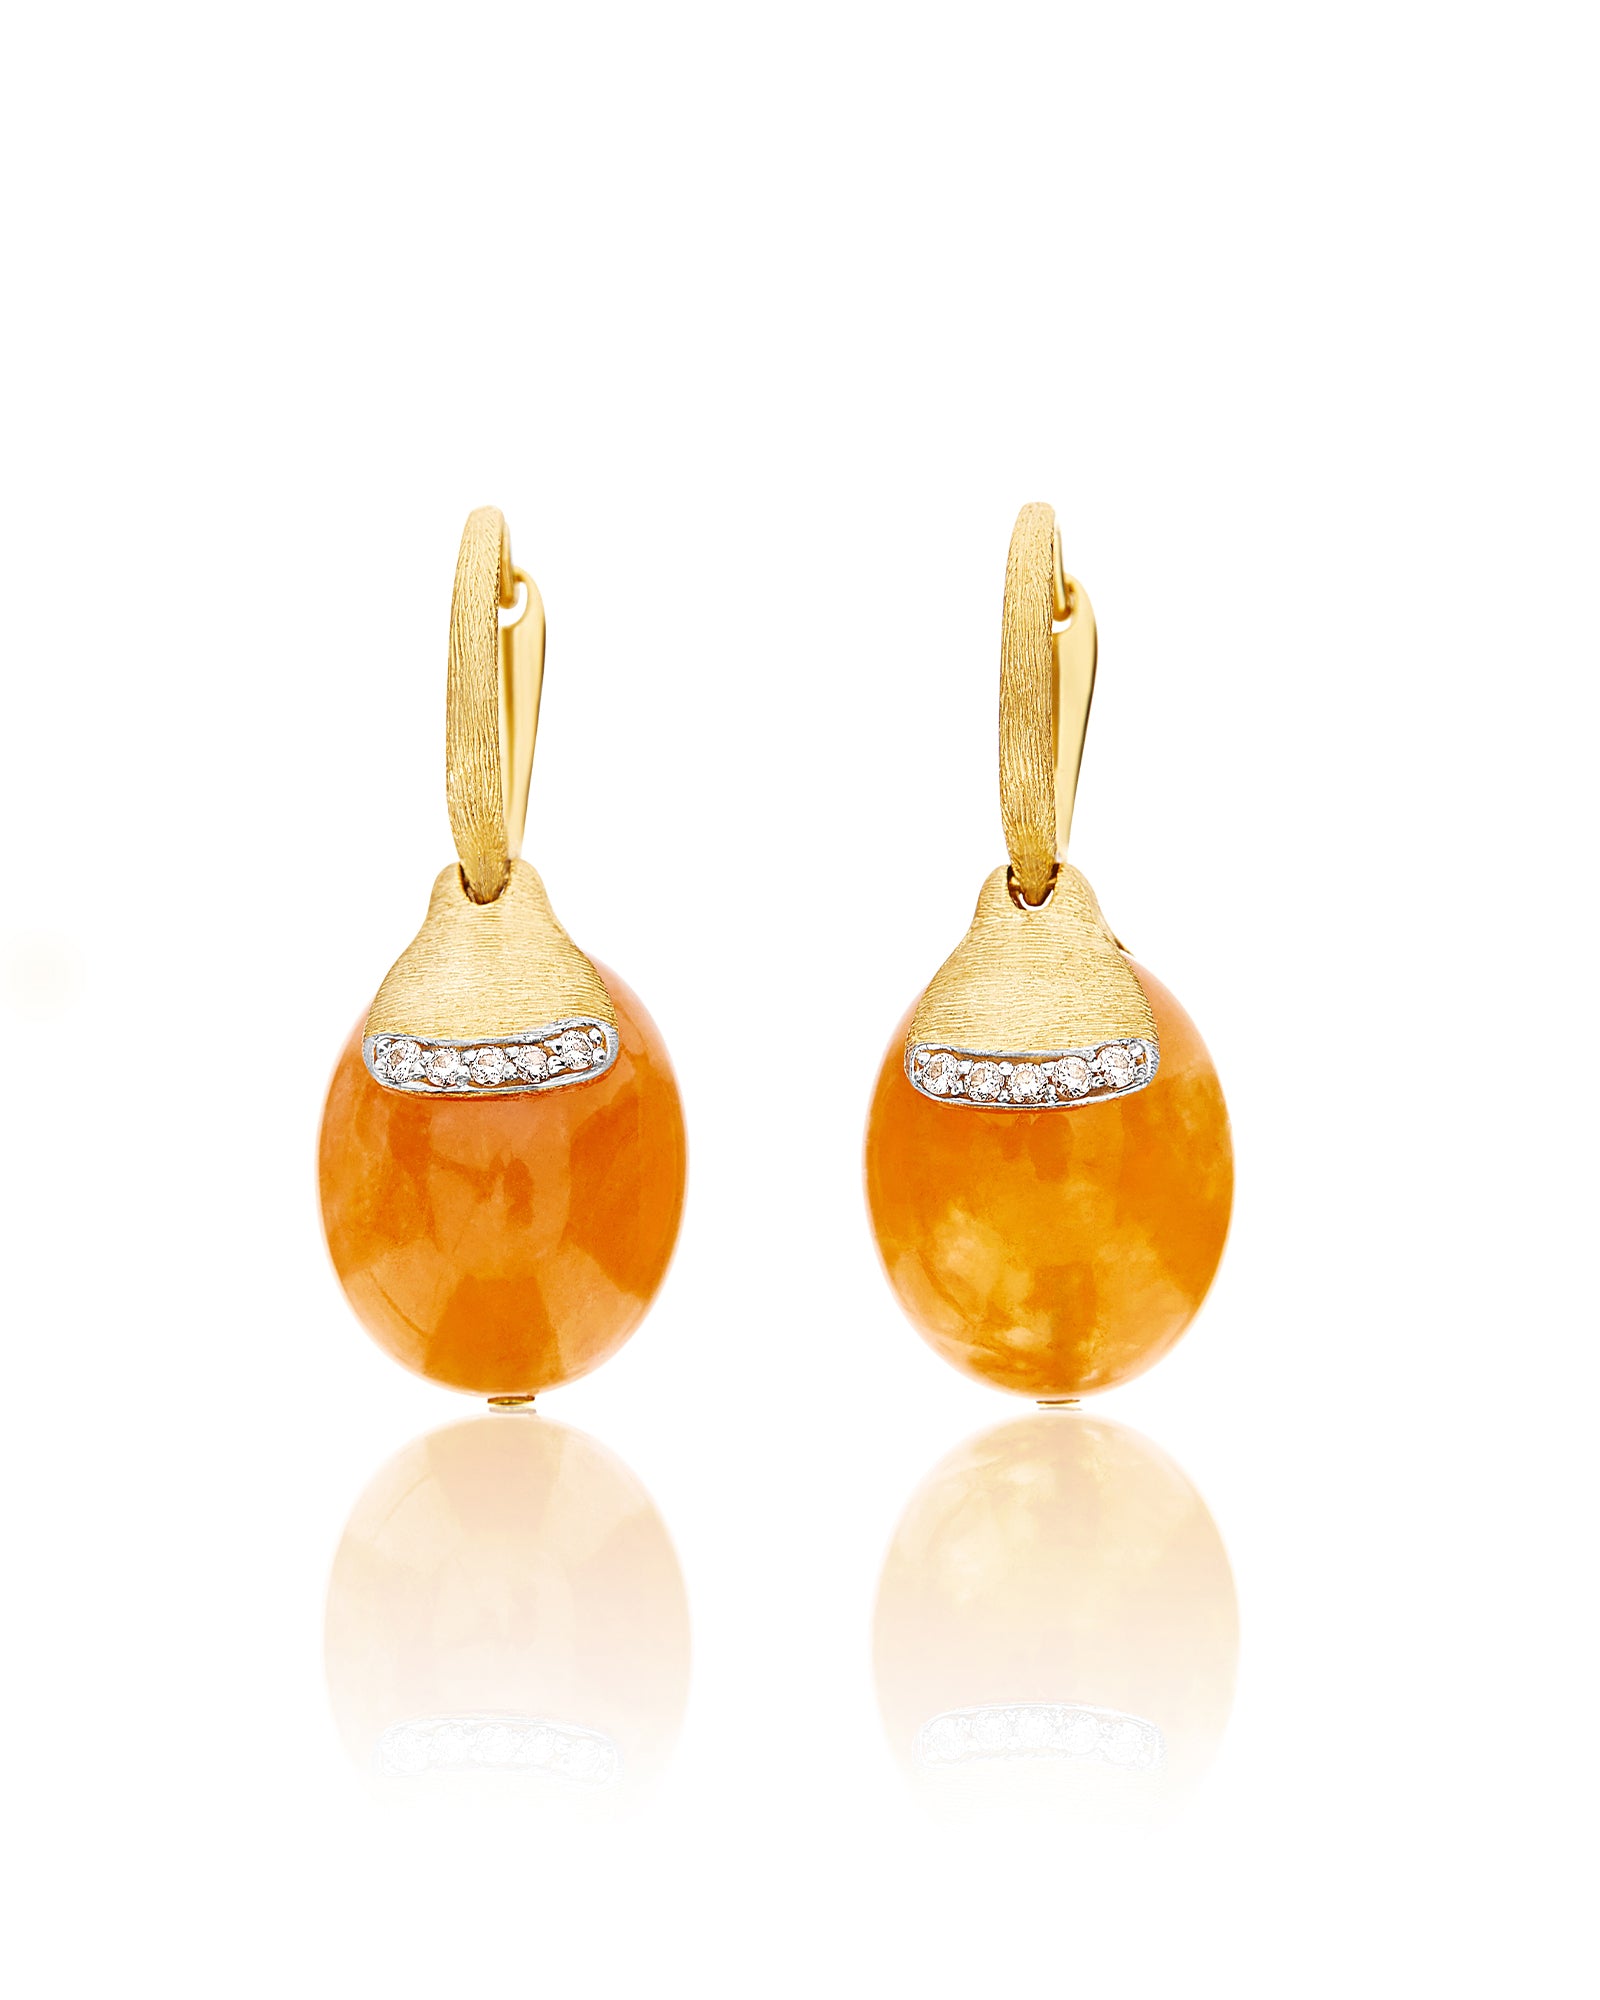 Petra "Amulets" Ciliegine Gold and Orange Aventurine Ball Drop Earrings with Diamonds Details (LARGE)